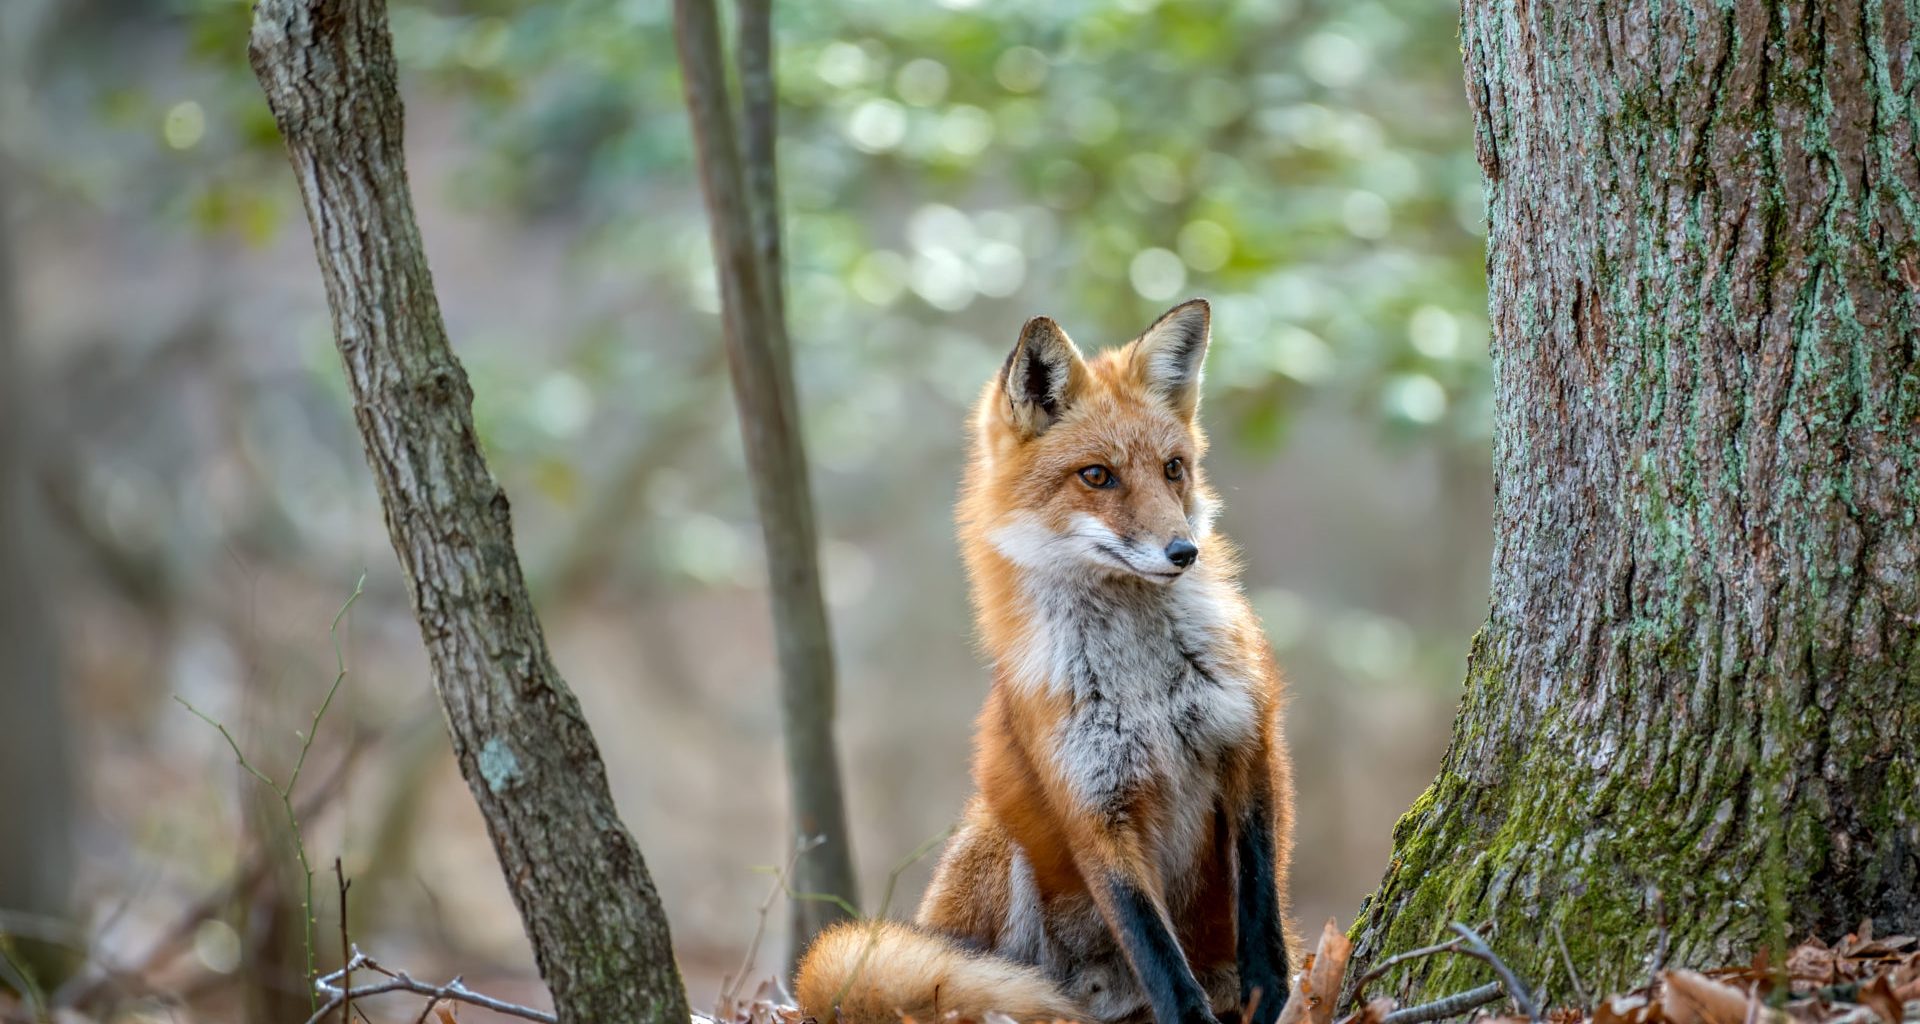 Animal charity urges ministers to enact plans for tighter fox hunting law after huntsman convicted 6